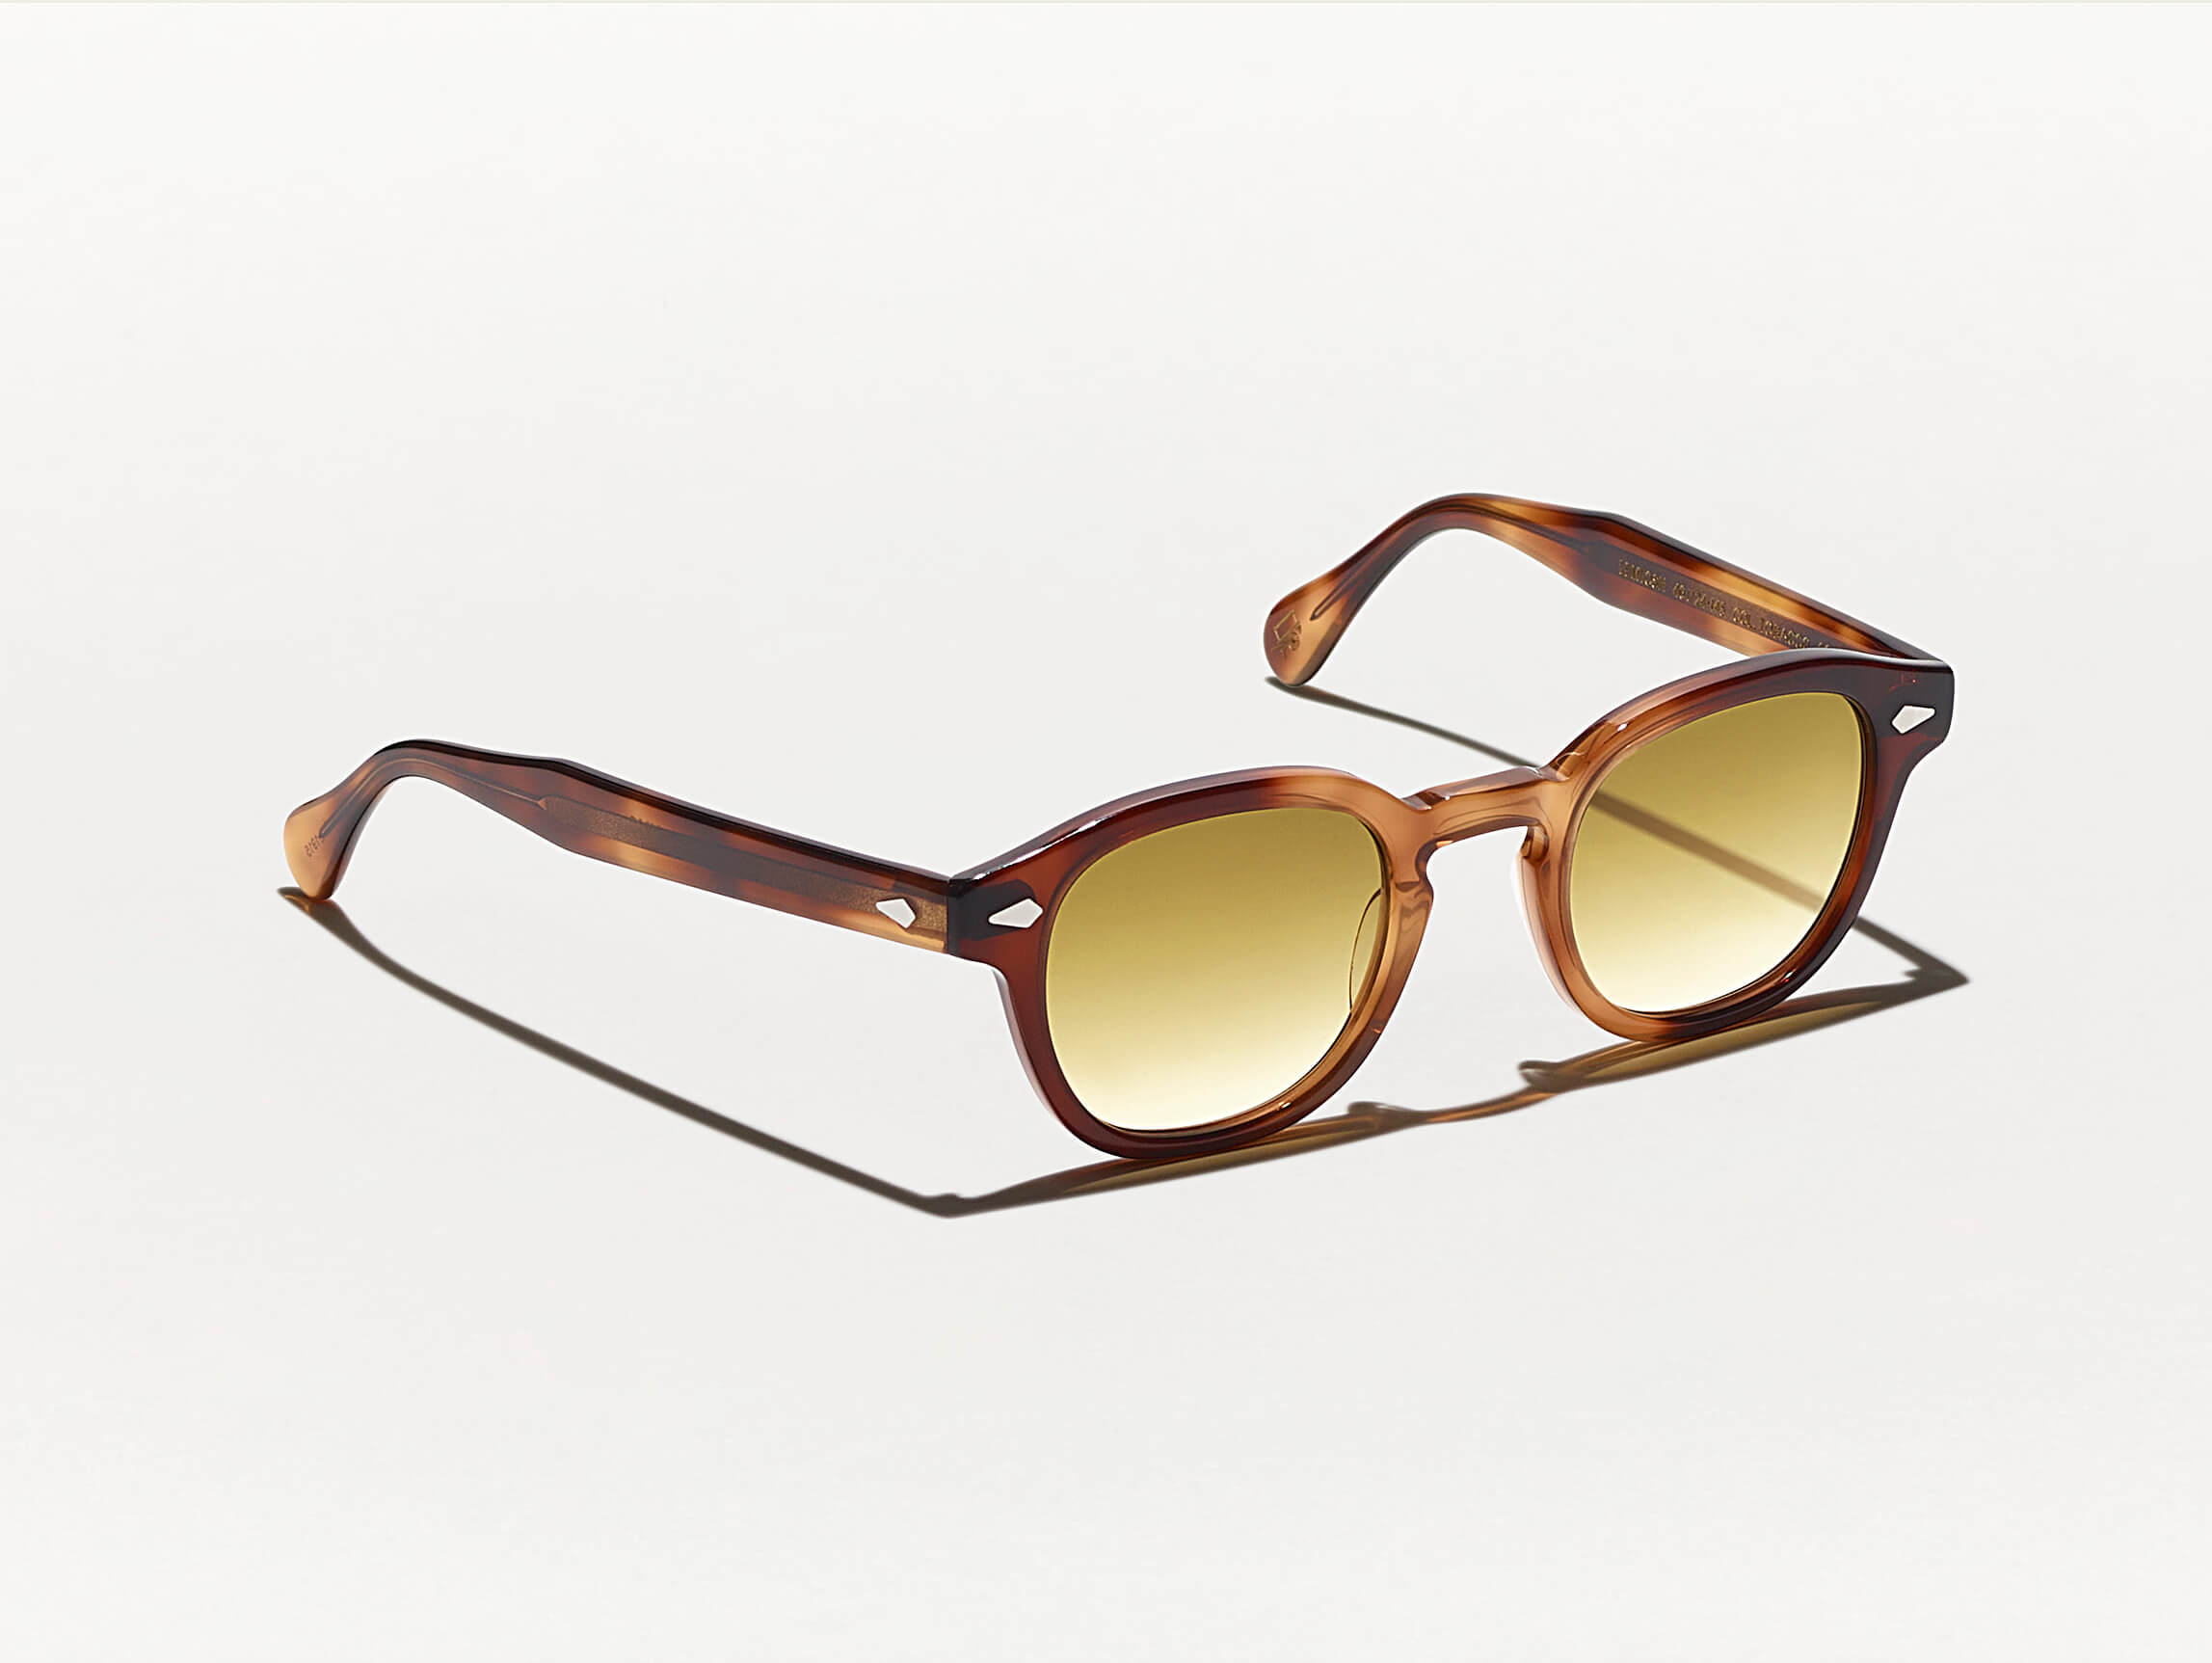 The LEMTOSH in Tobacco with Chestnut Fade Tinted Lenses